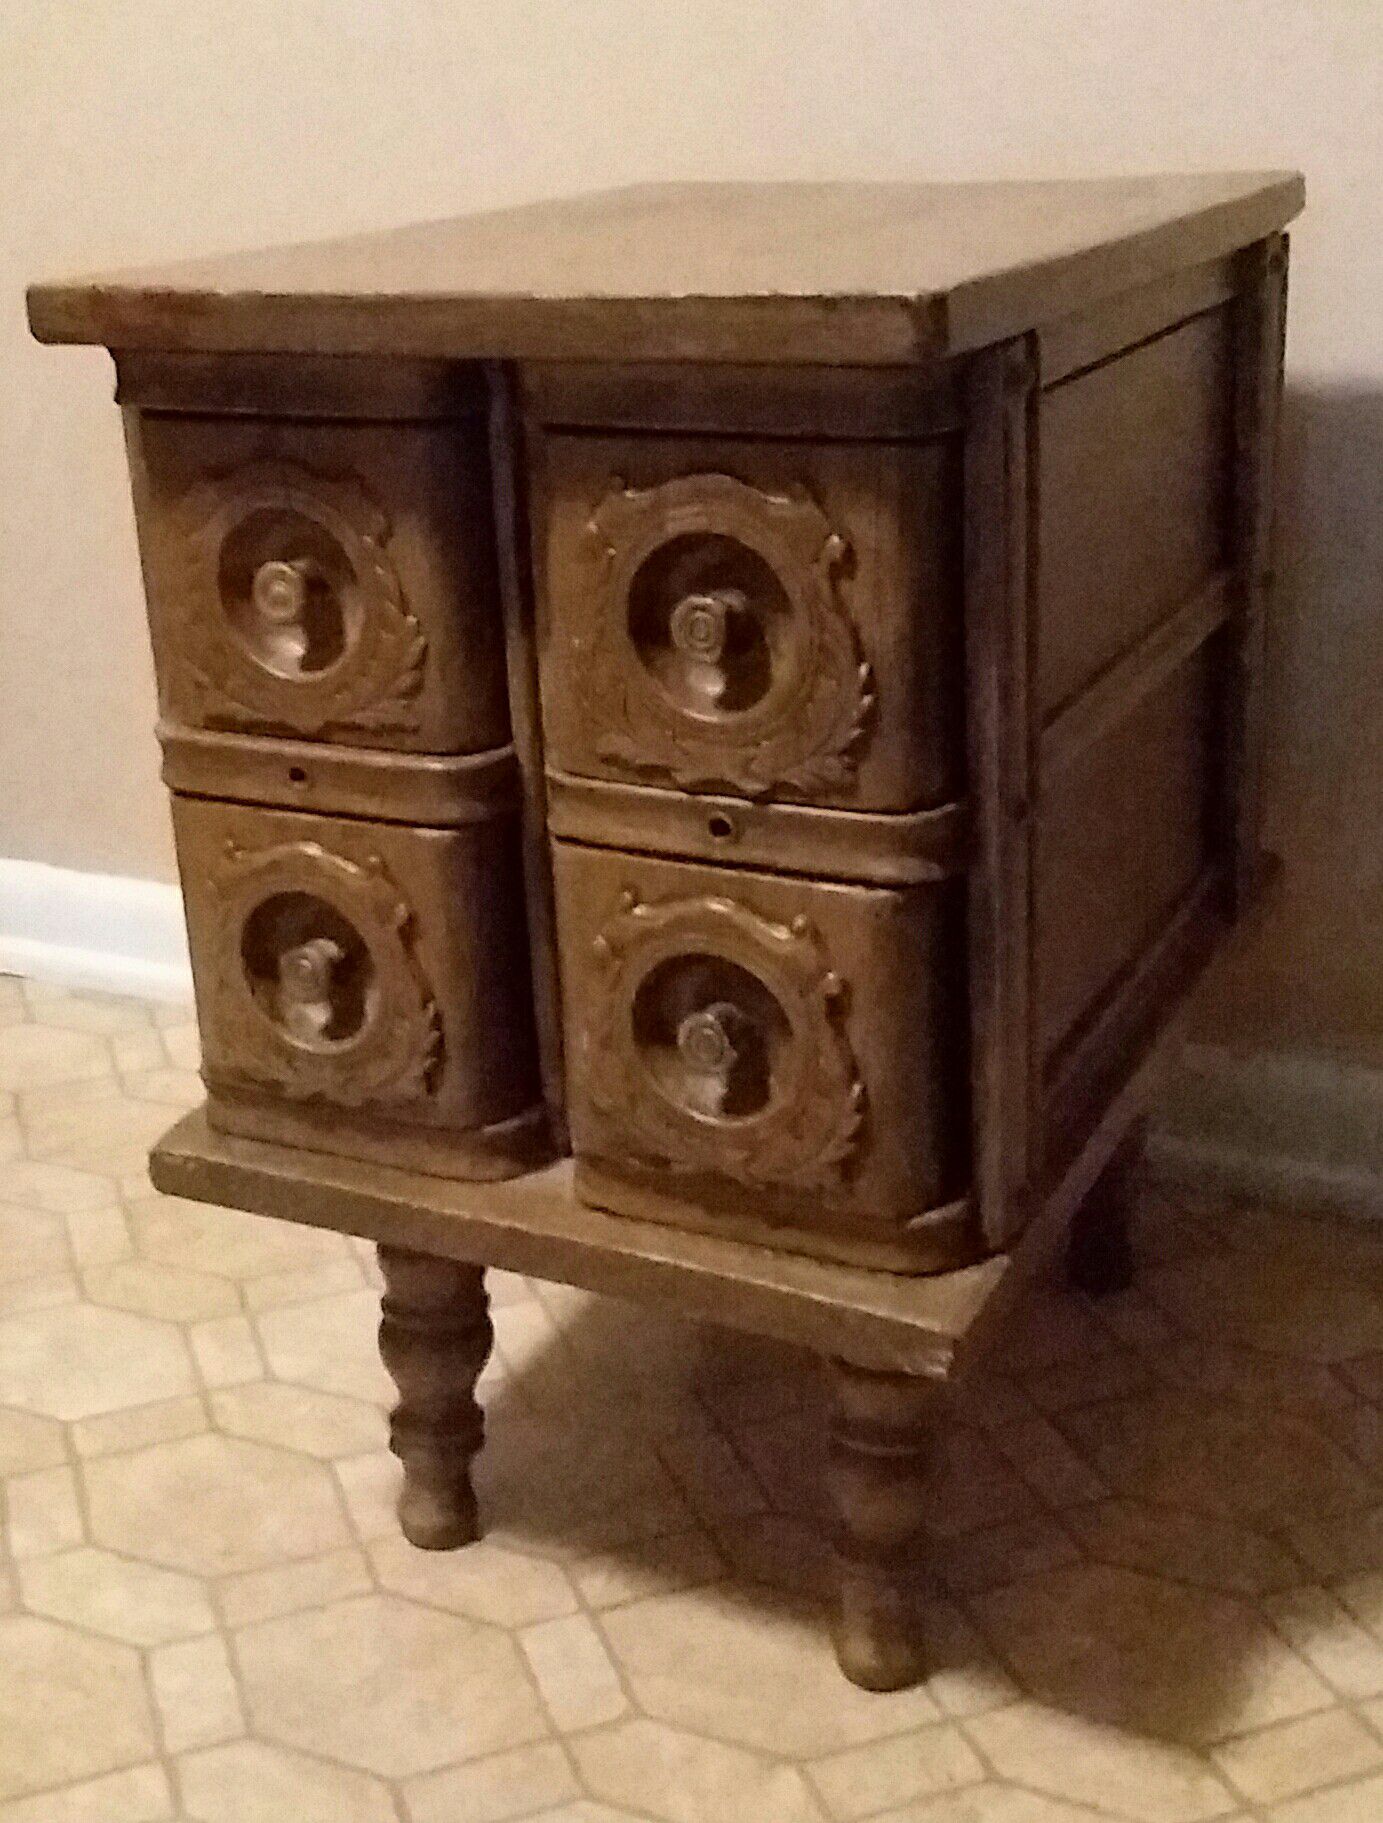 (Solid wood)Table/singer sewing machine drawers (Excellent Used Condition)